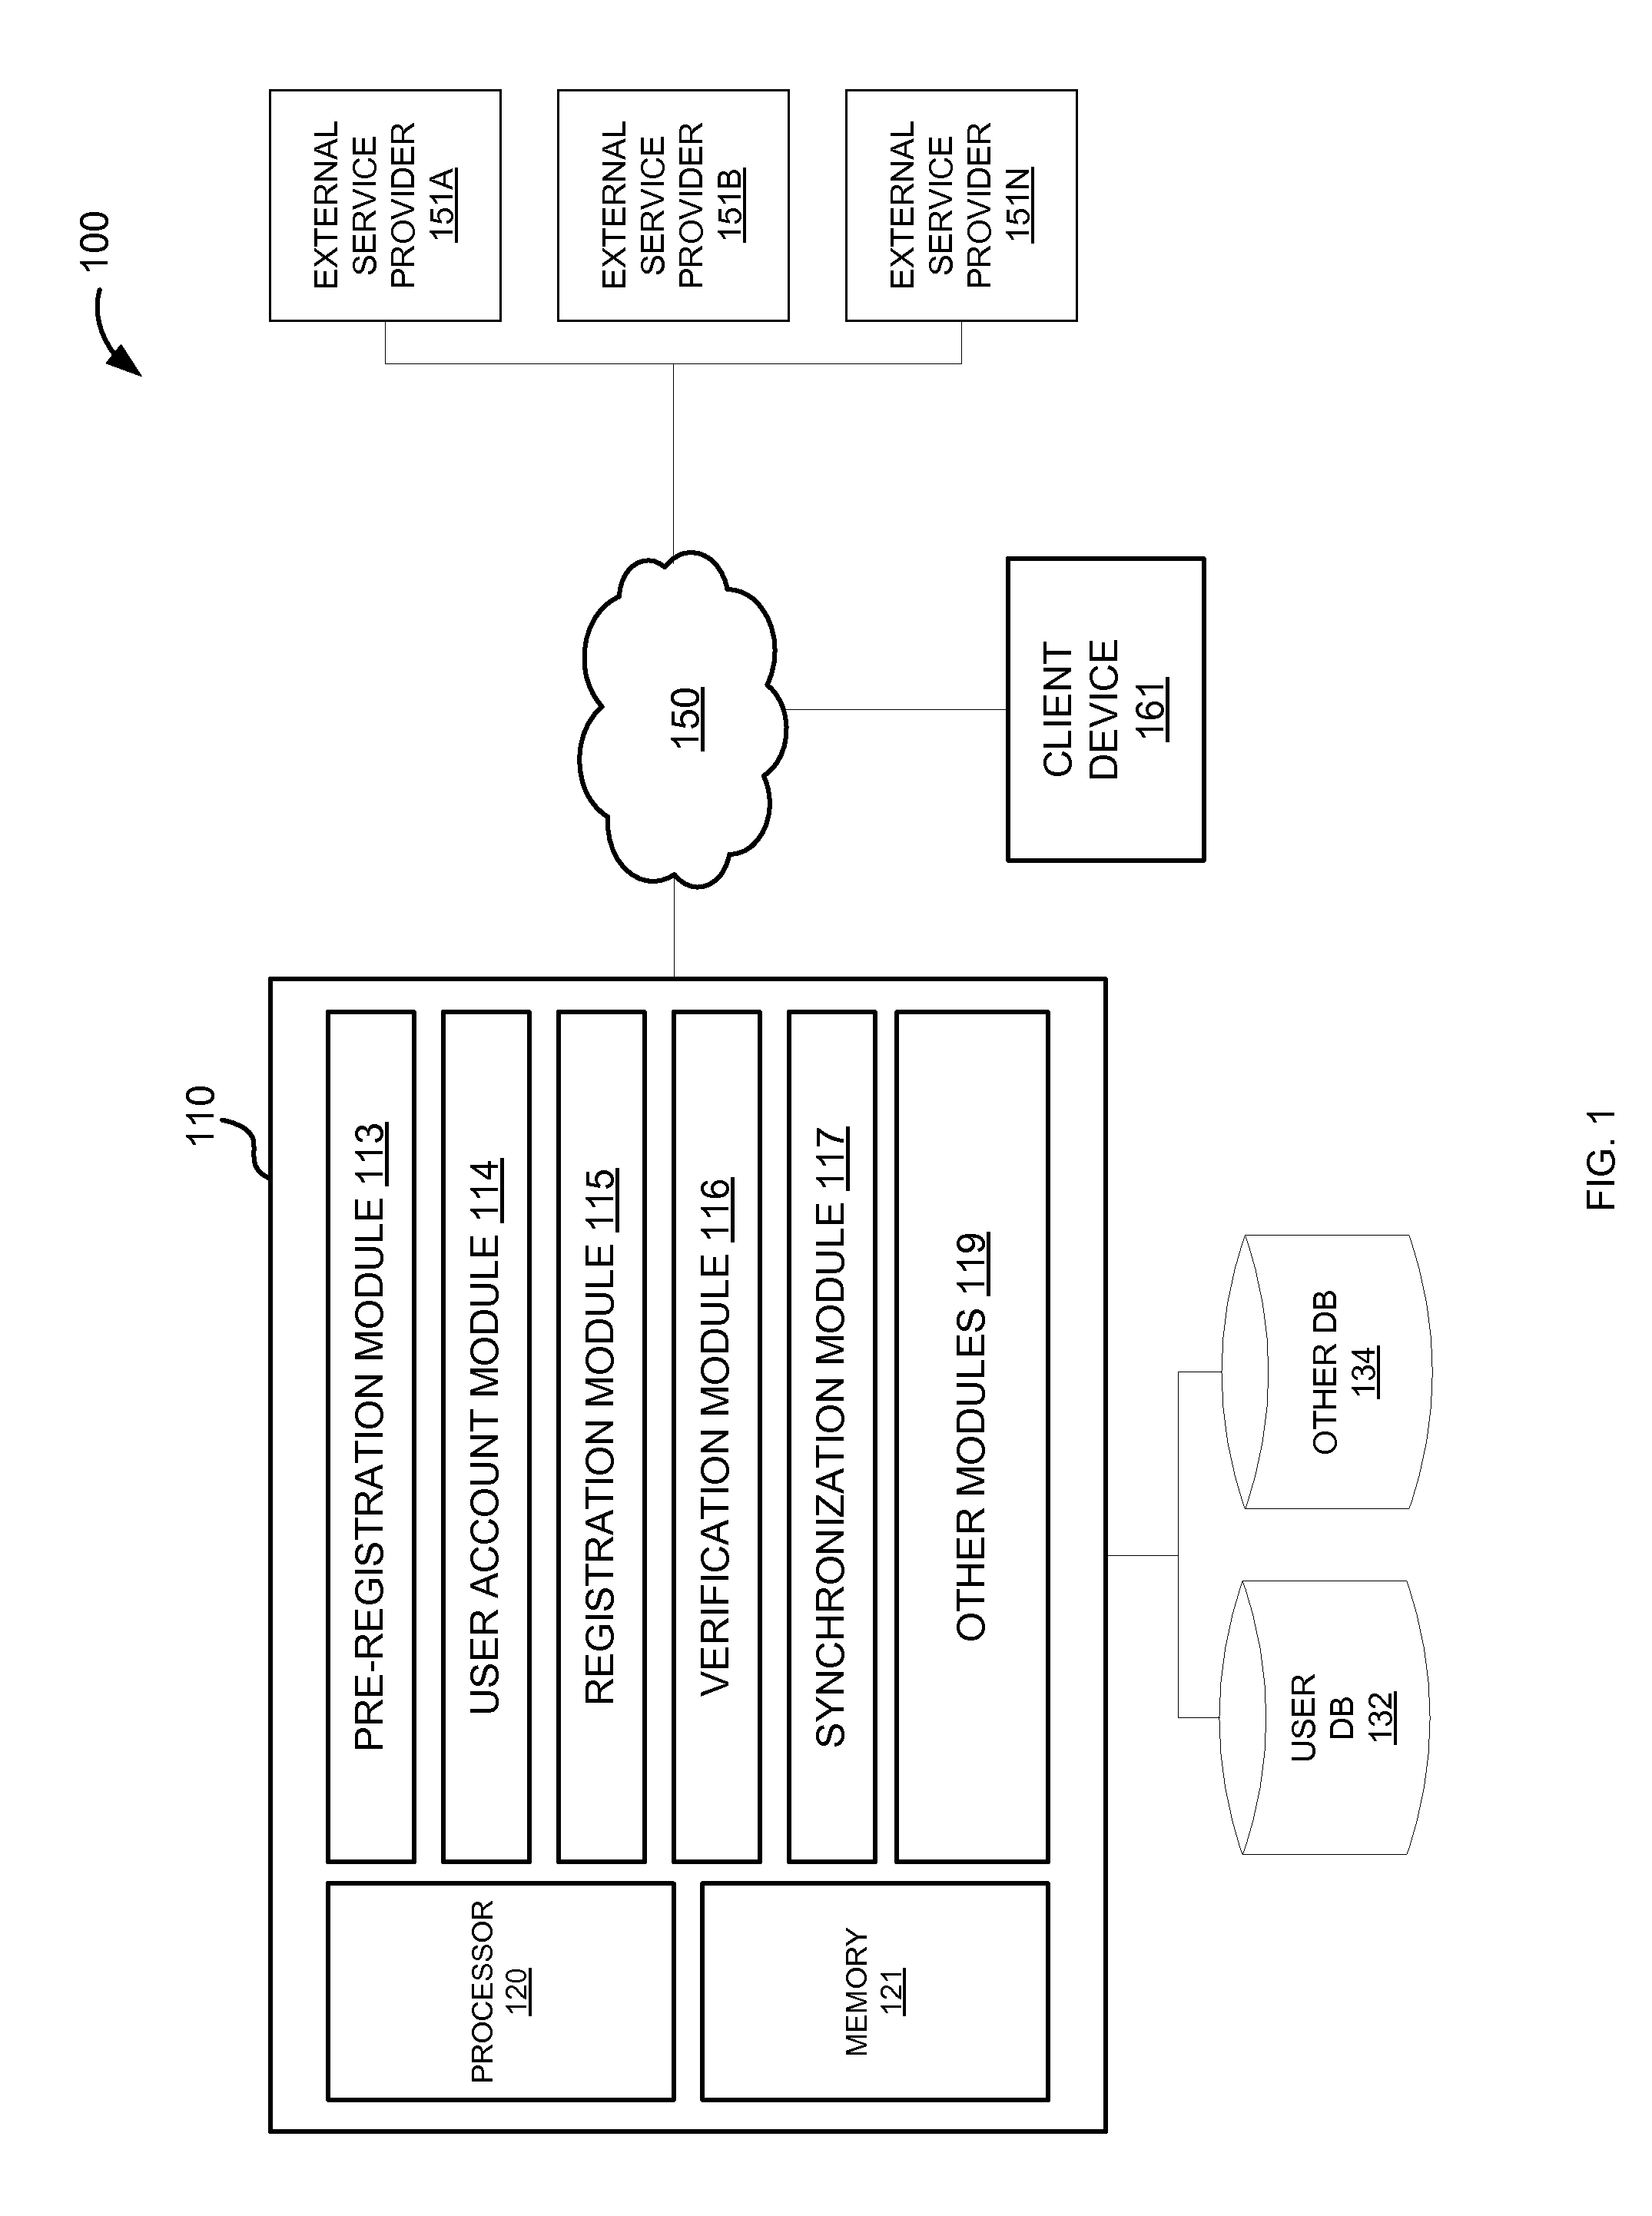 System and method for facilitating federated user provisioning through a cloud-based system